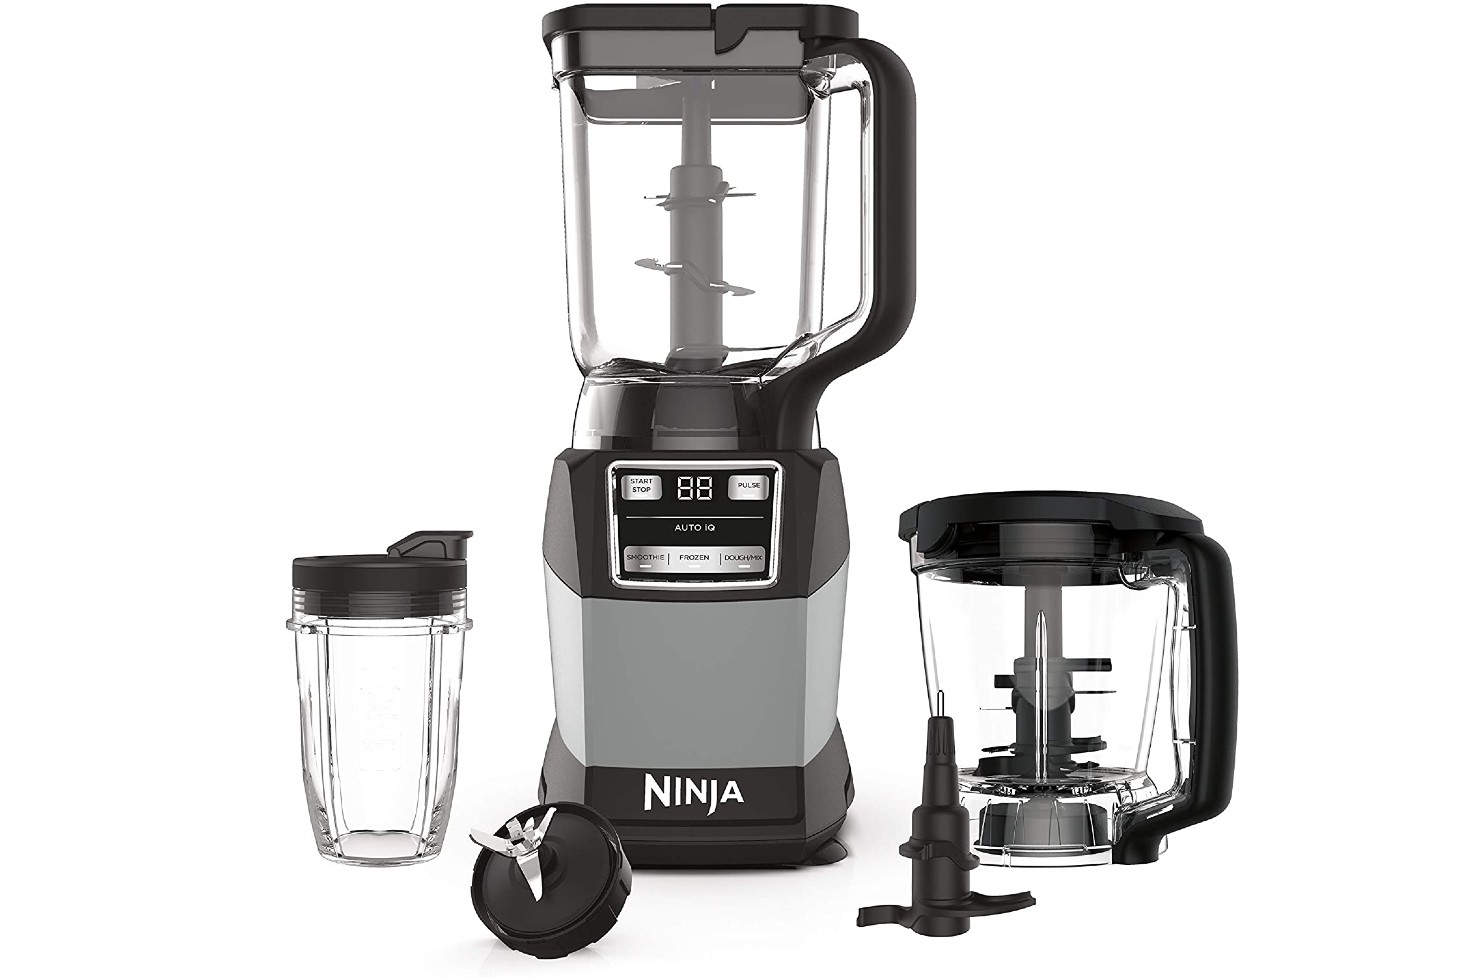 BL660 Professional Compact Smoothie & Food Processing Blender